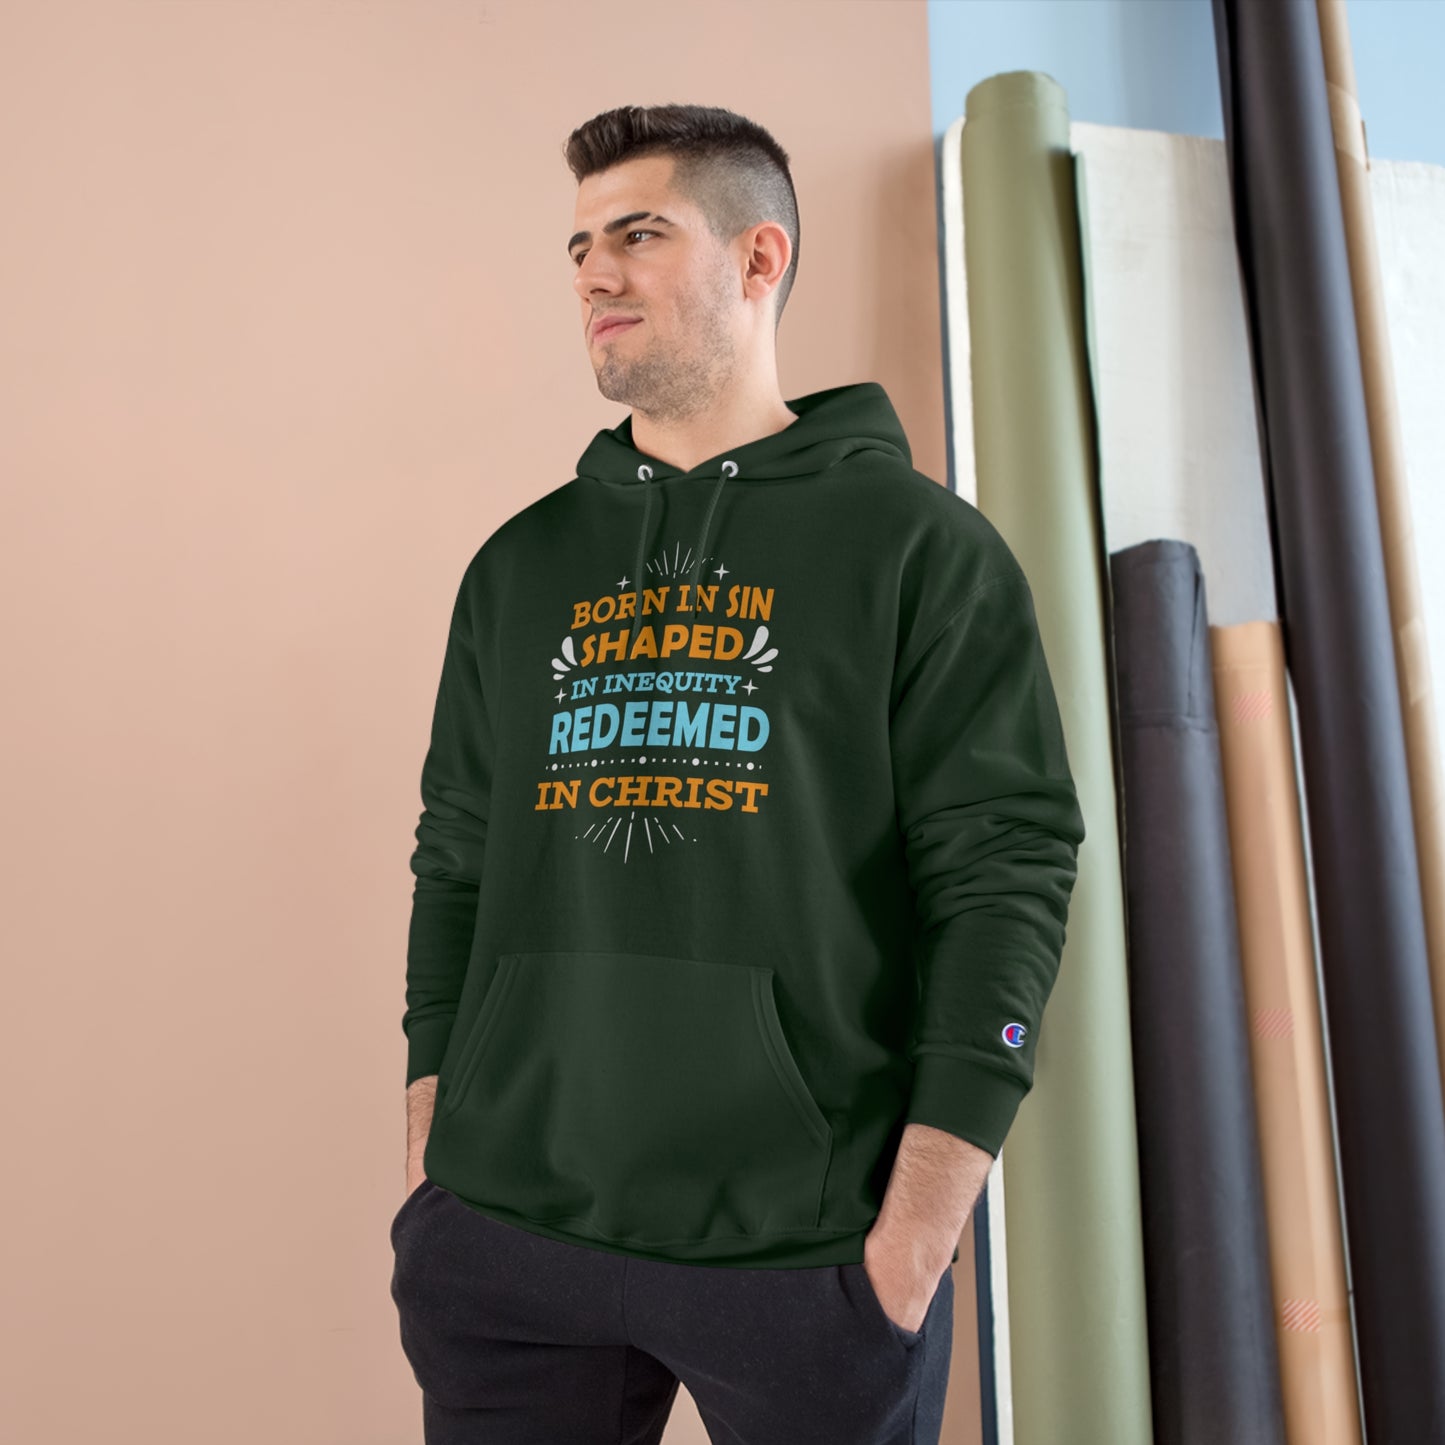 Born In Sin Shaped In Inequity Redeemed In Christ Unisex Champion Hoodie